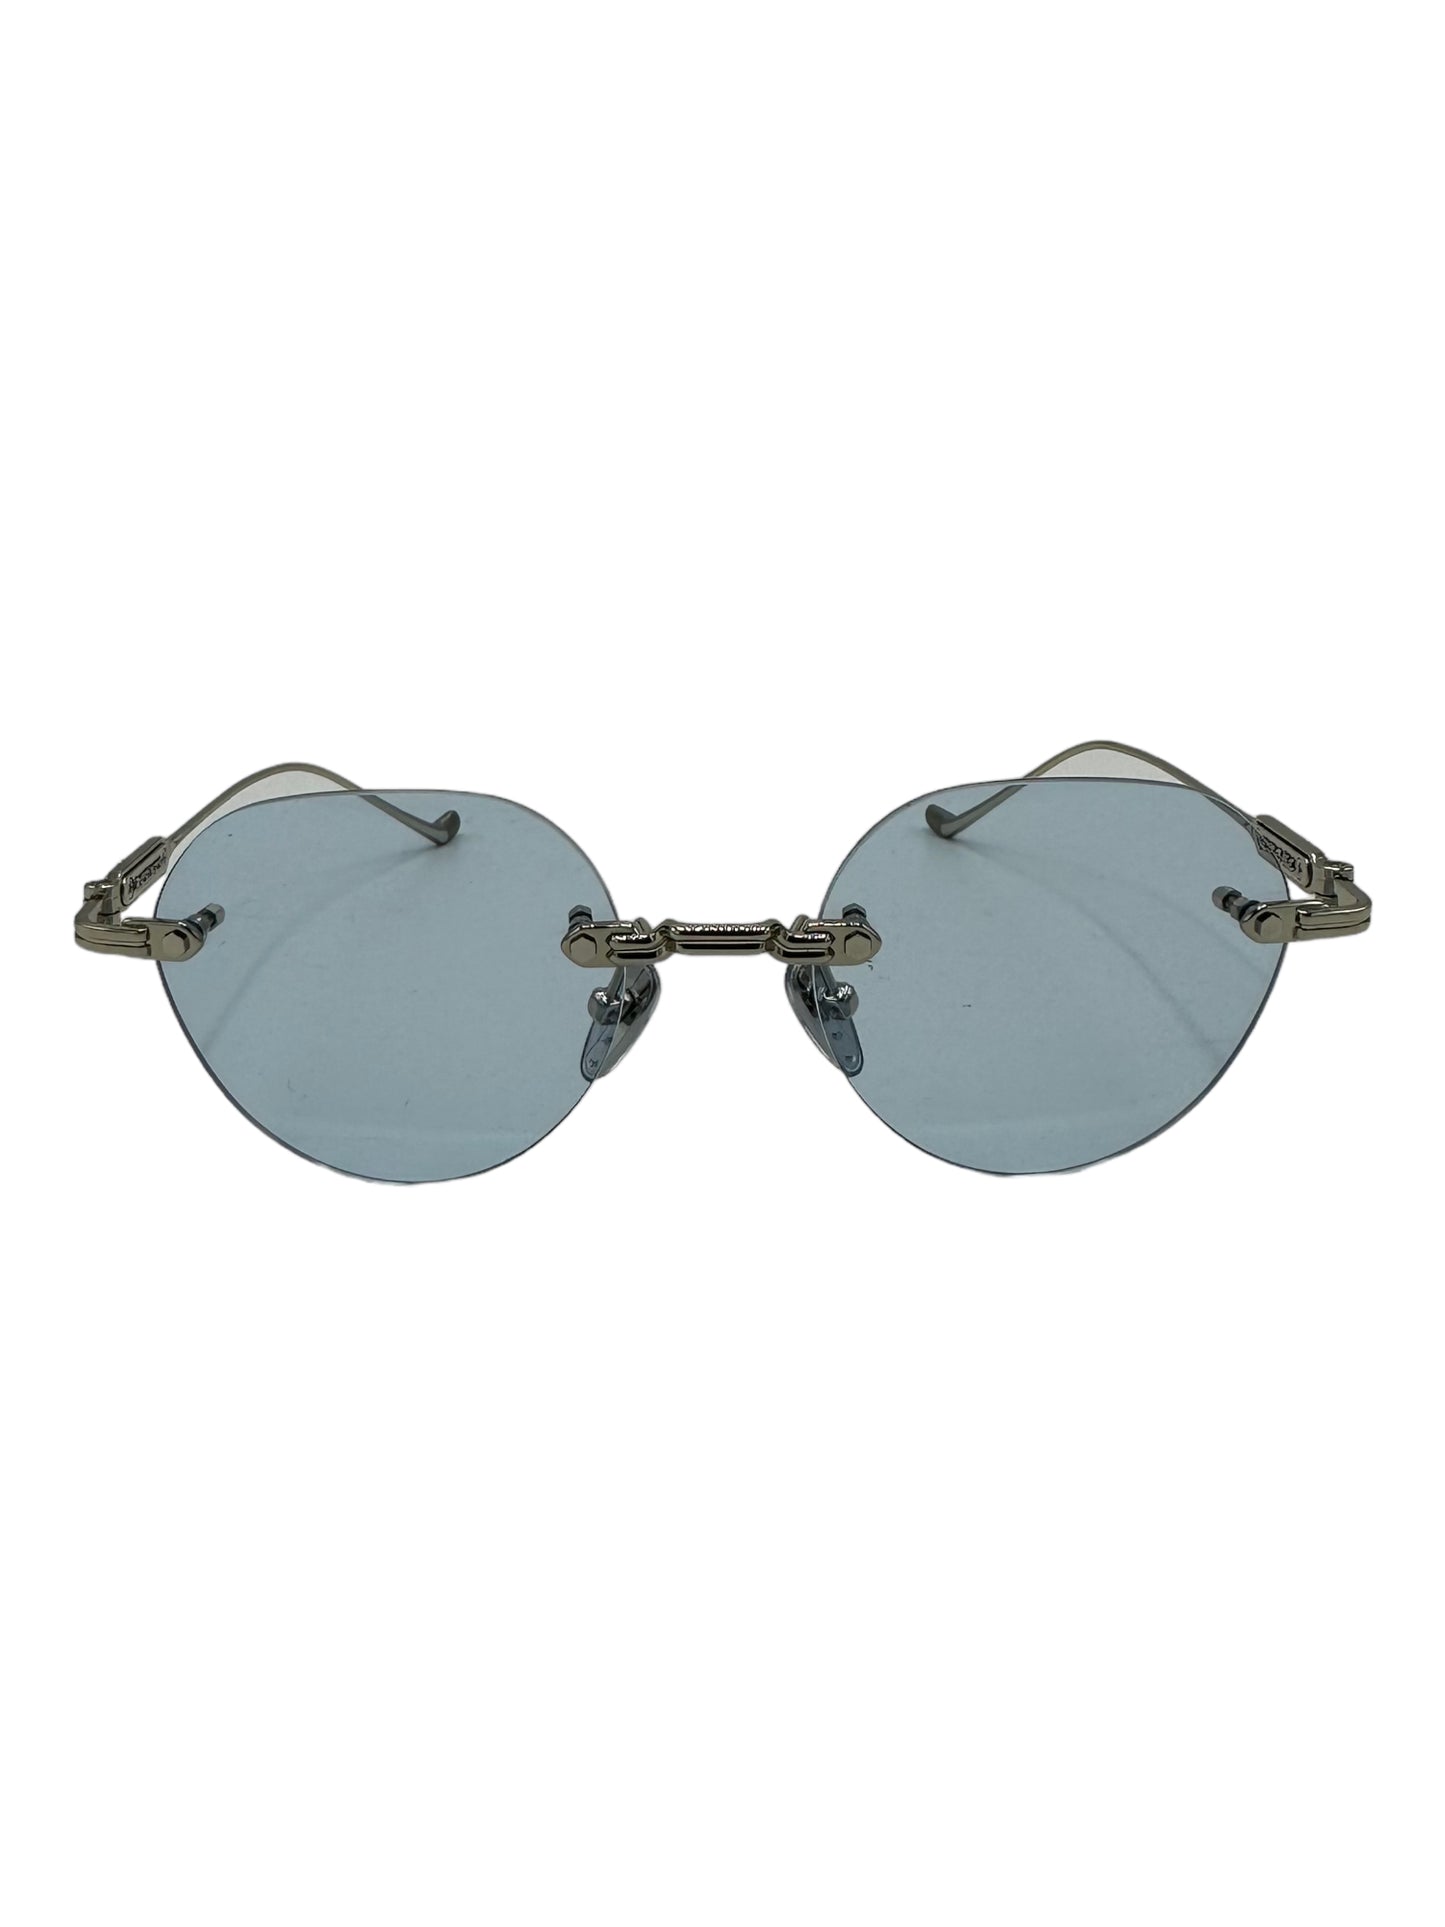 Chrome Hearts Blue Lens Rimless Sunglasses - Genuine Design Luxury Consignment for Men. New & Pre-Owned Clothing, Shoes, & Accessories. Calgary, Canada